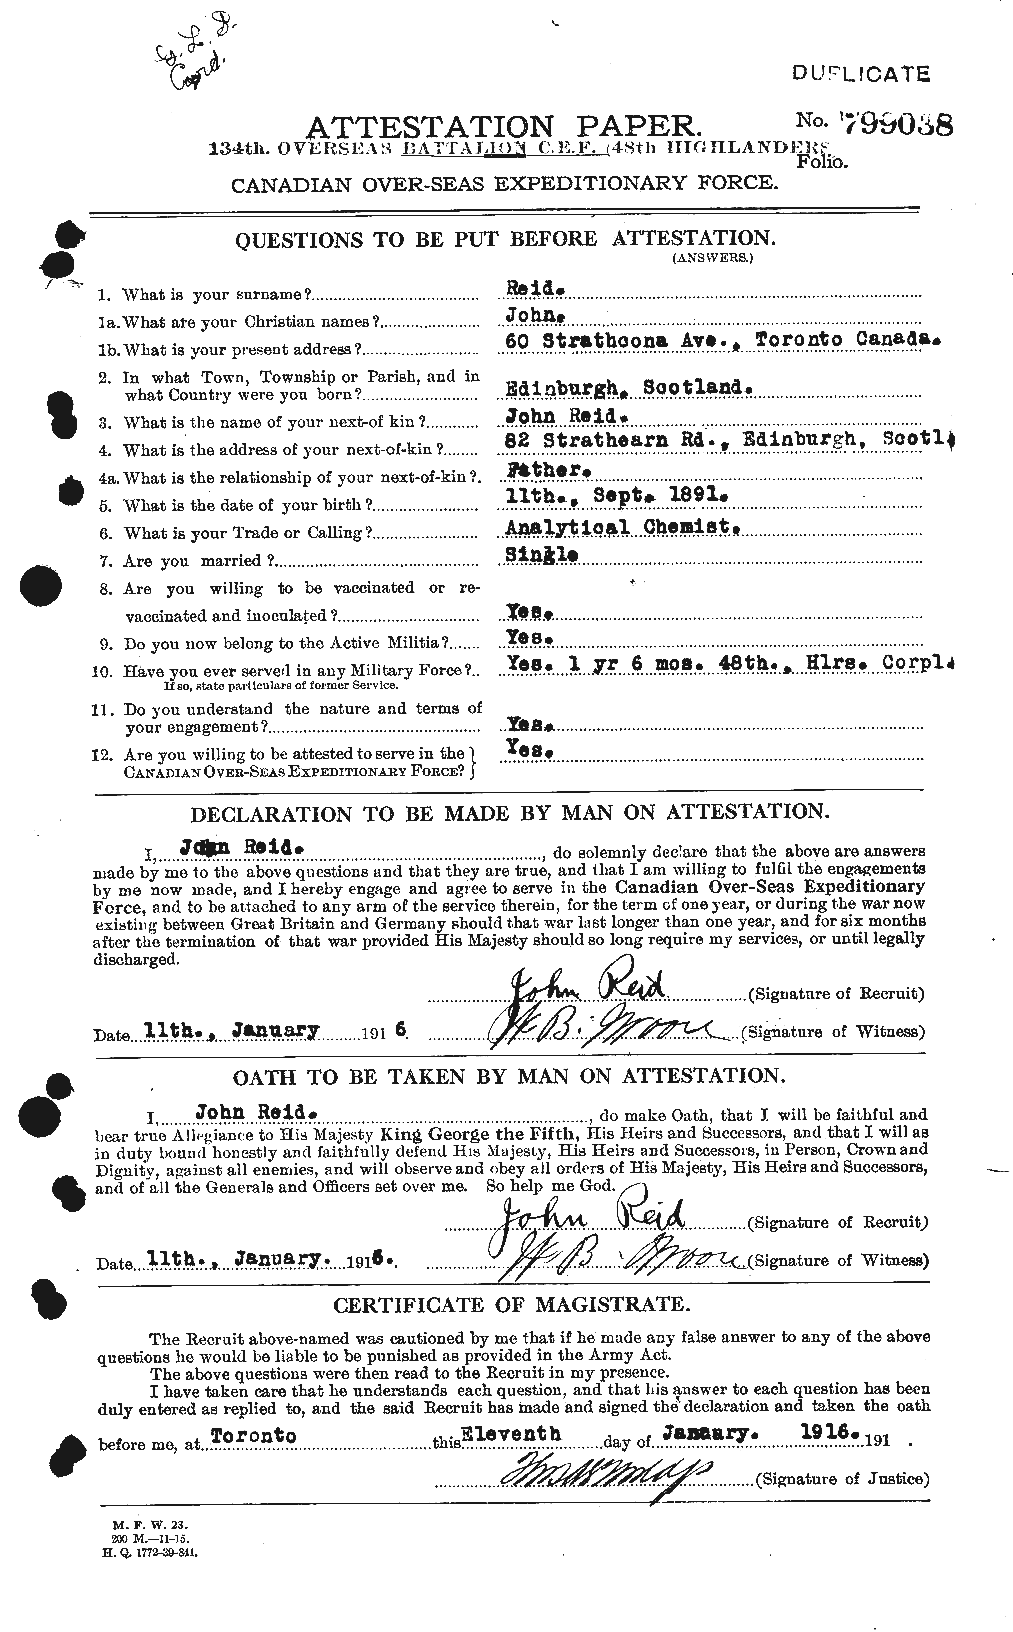 Personnel Records of the First World War - CEF 598815a